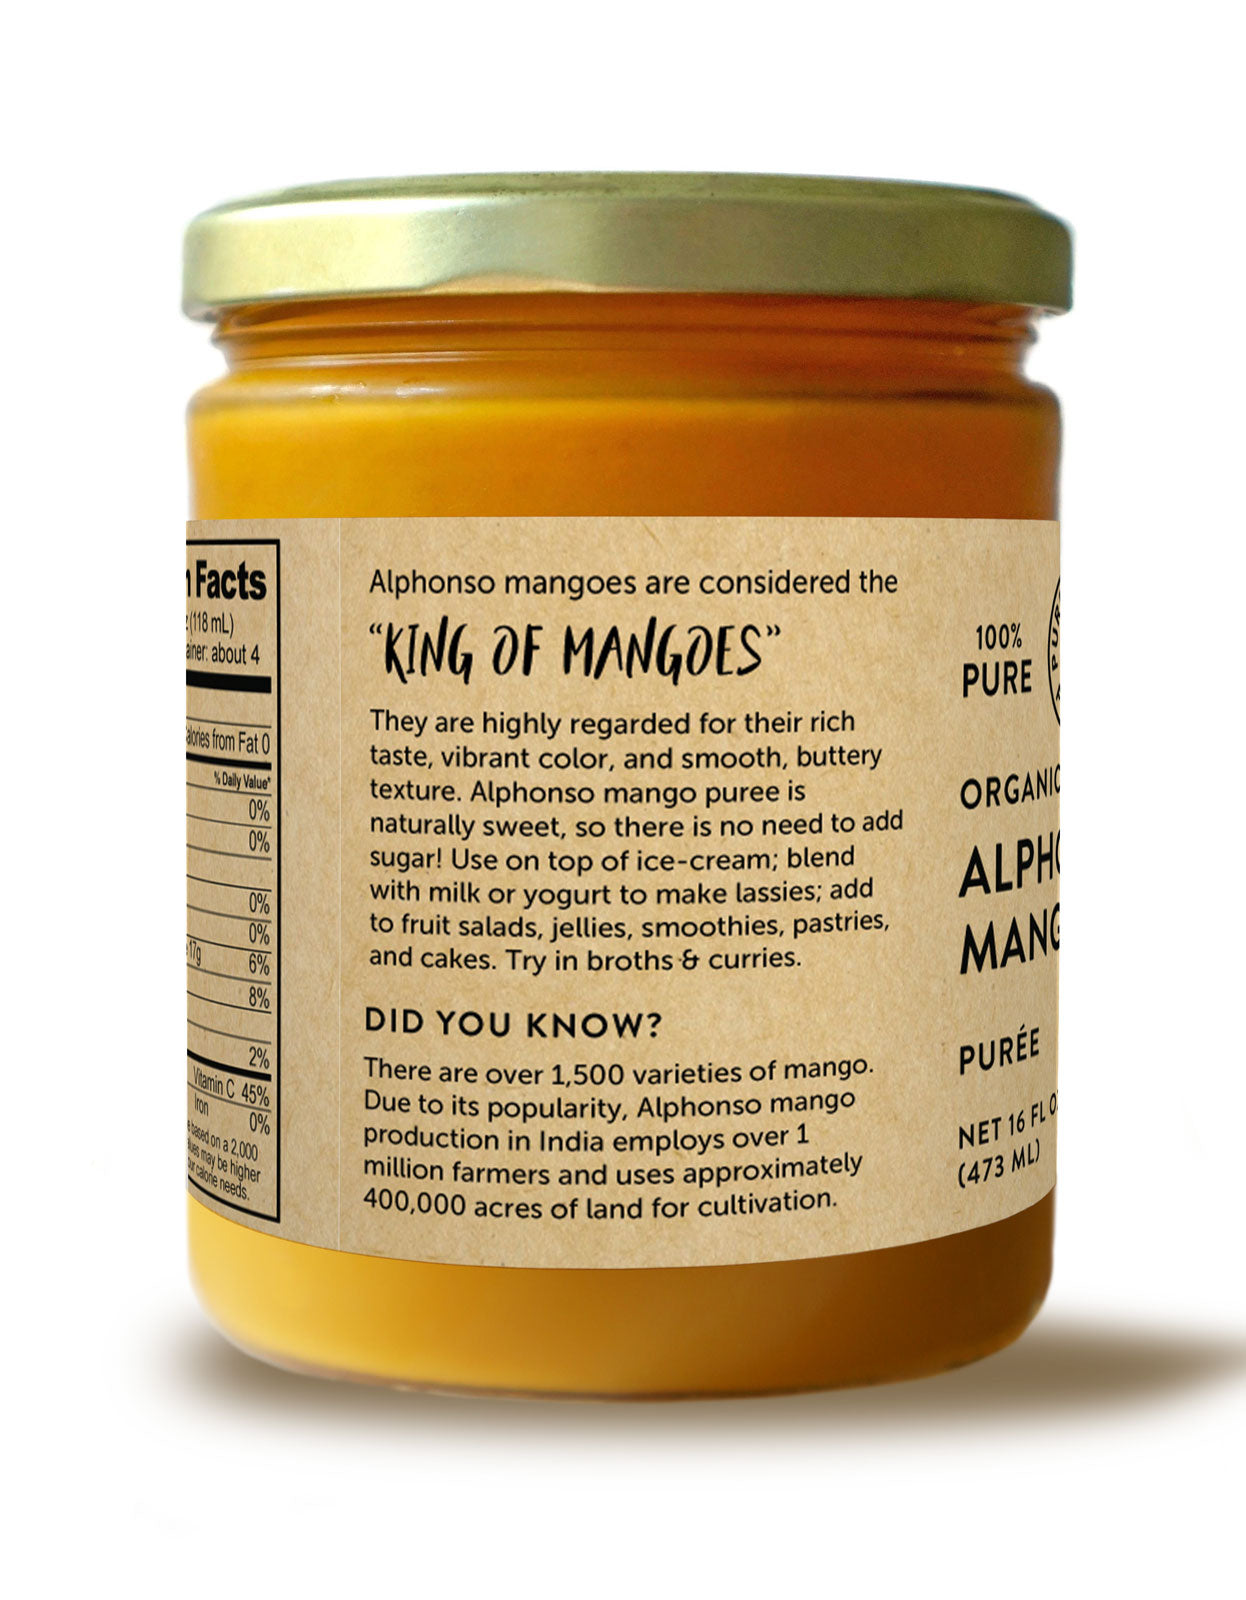 jar of alphonso mango puree containing 100% pure organic mango pulp. label says alphonso mangoes are considered the king of mangos because of their rich taste, vibrant color, and smooth, buttery texture. 